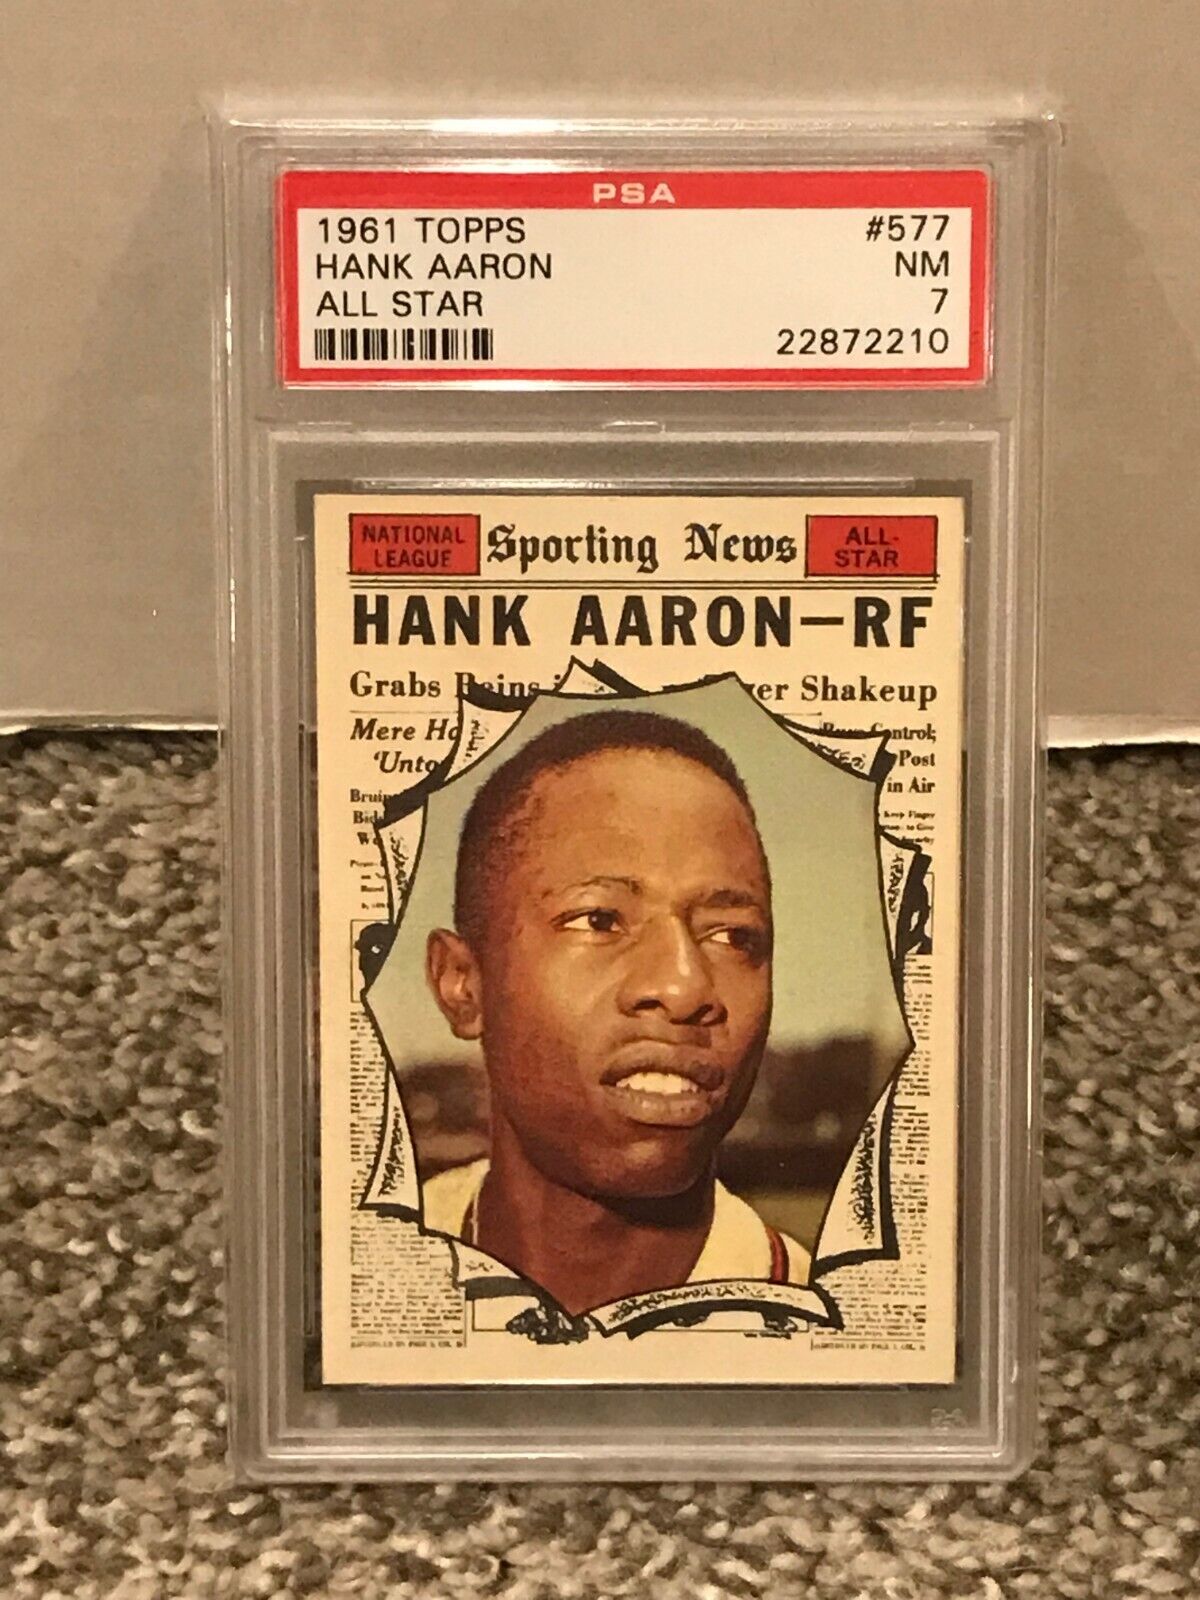 1961 Topps #577 - HANK AARON All Star - PSA 7 NM - National League * CENTERED *